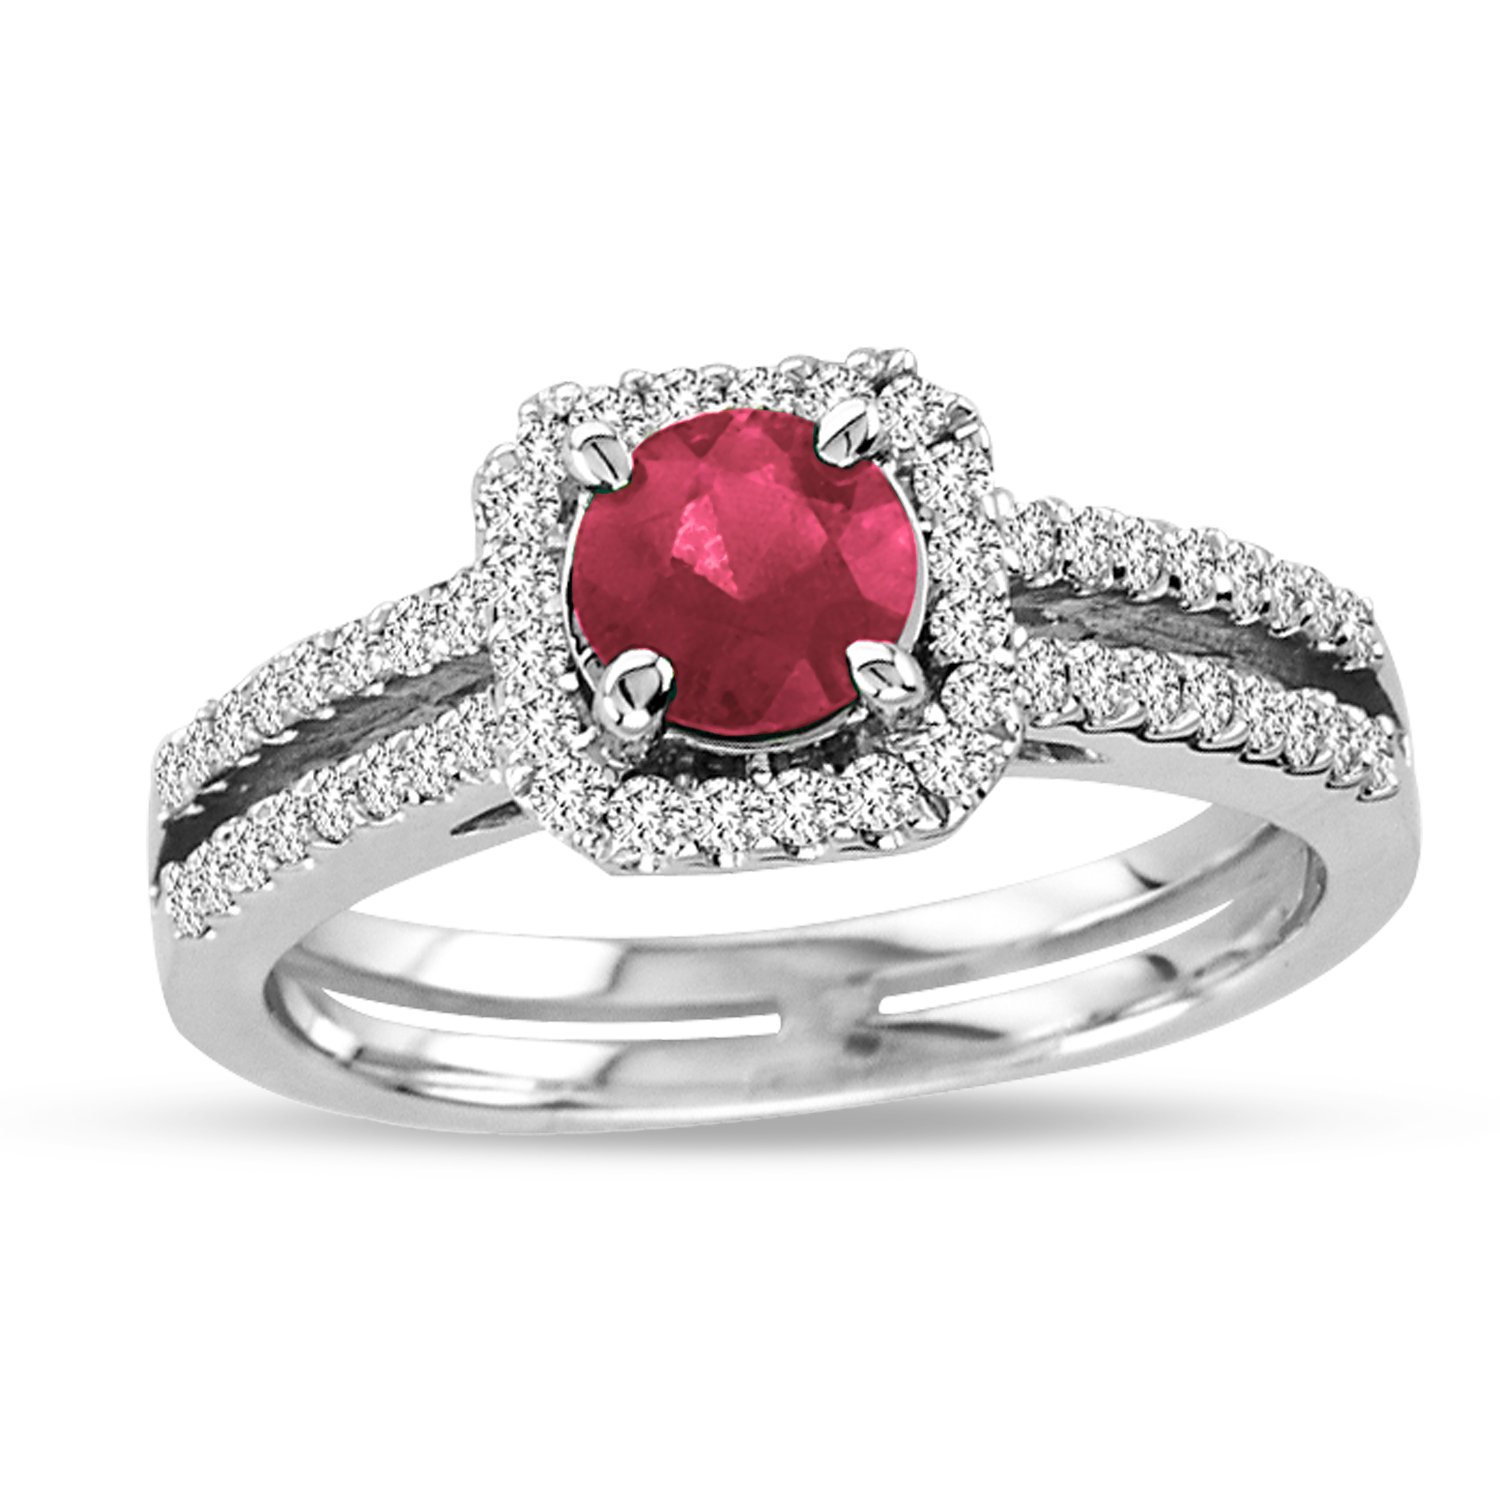 View 14k Gold Ring With 0.75ct Round Natural Heated Ruby & 0.40ct tw of Round Diamonds 